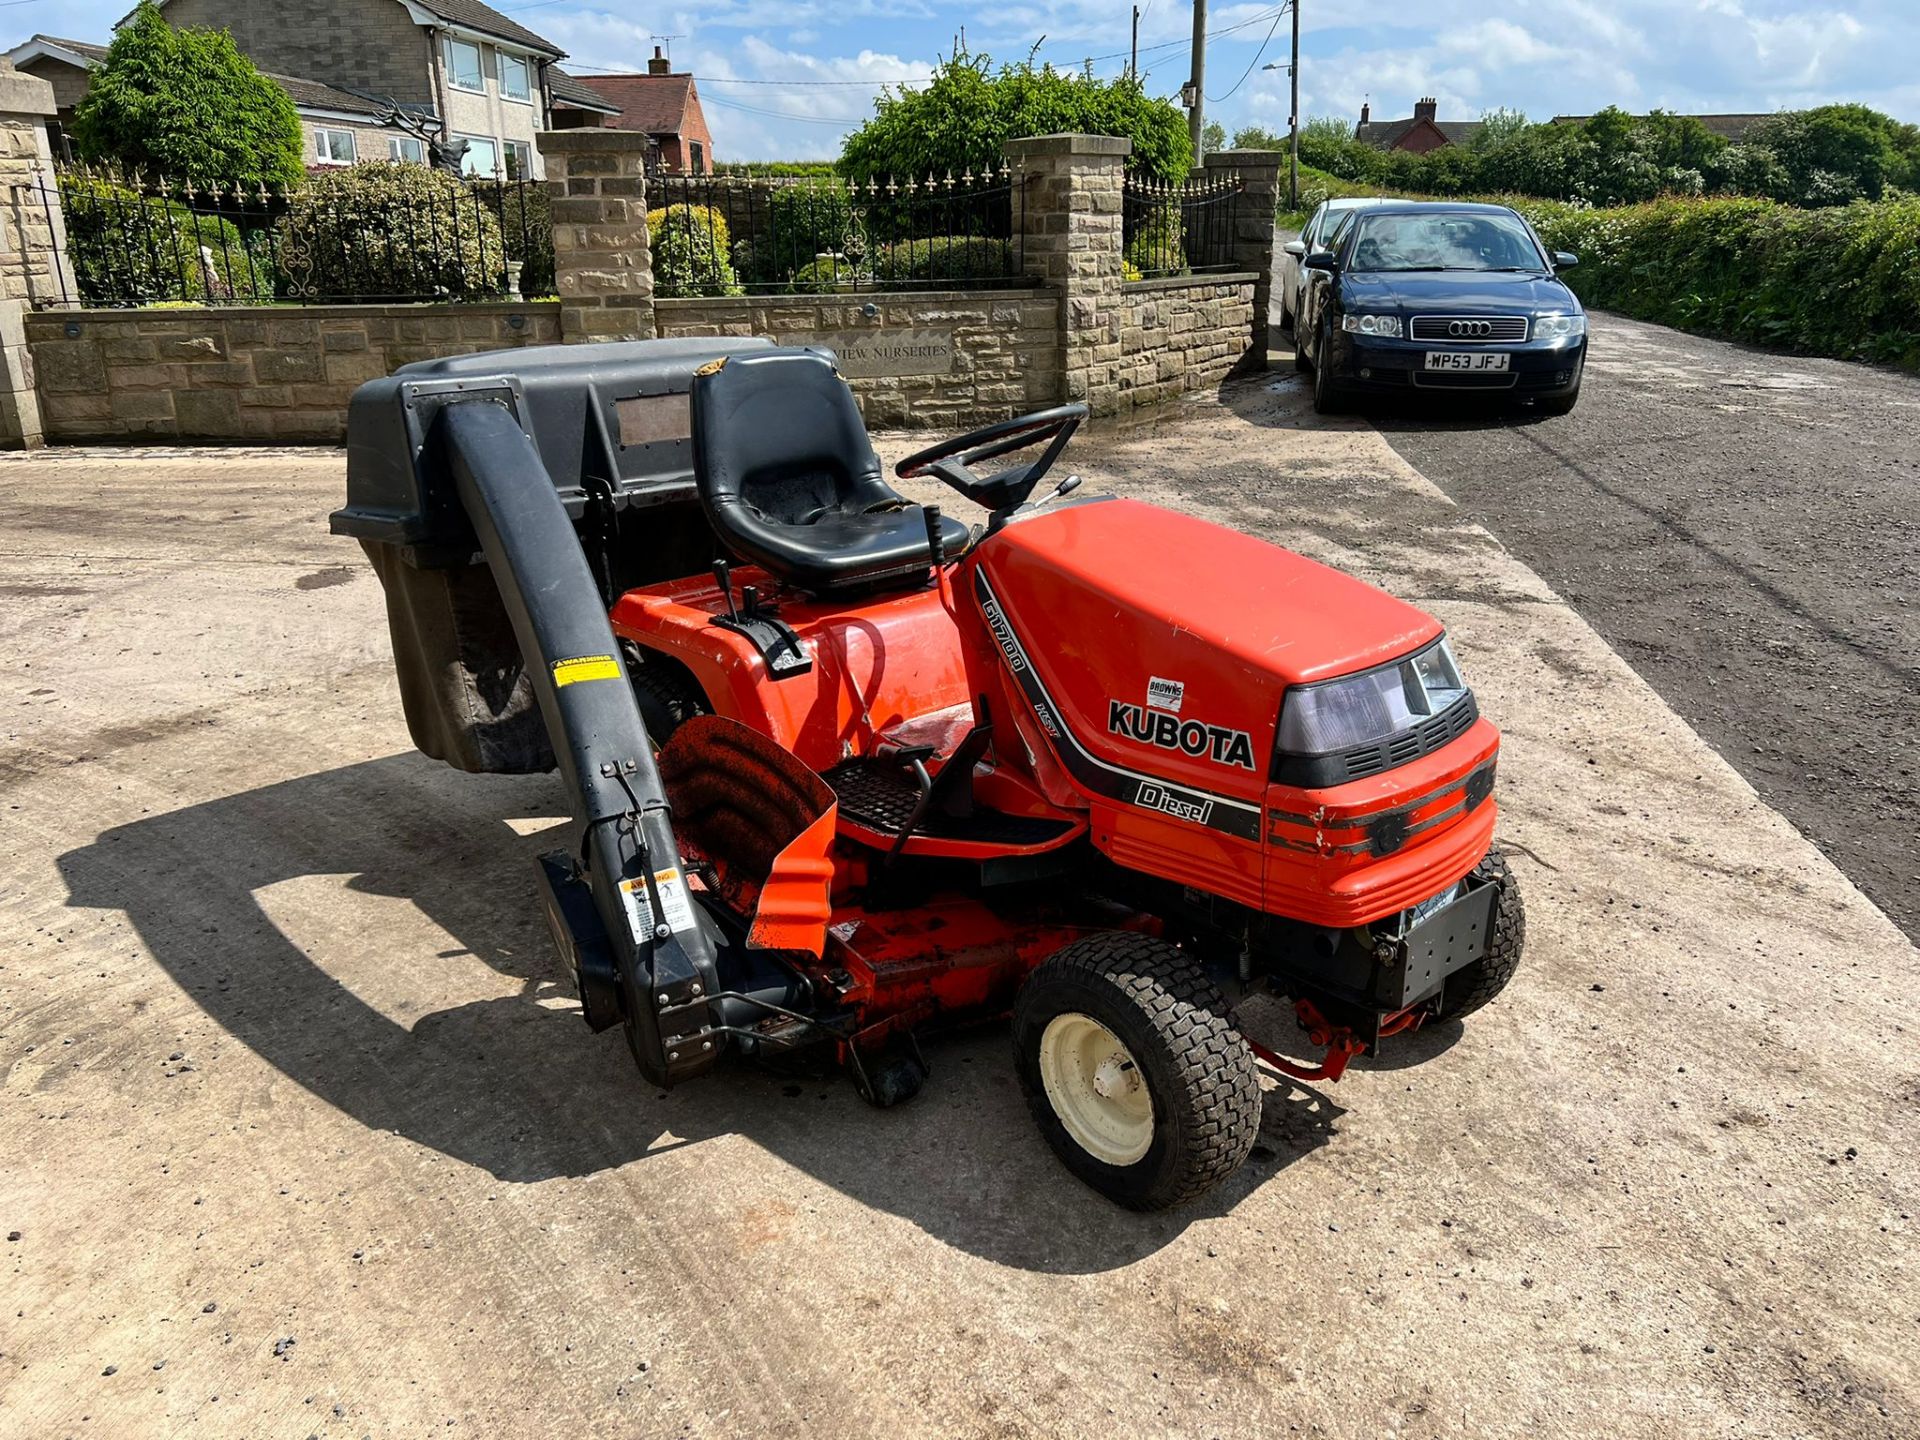 Kubota G1700 Diesel Ride On Mower With Rear Collector, Runs Drives And Cuts "NOVAT" - Image 3 of 12